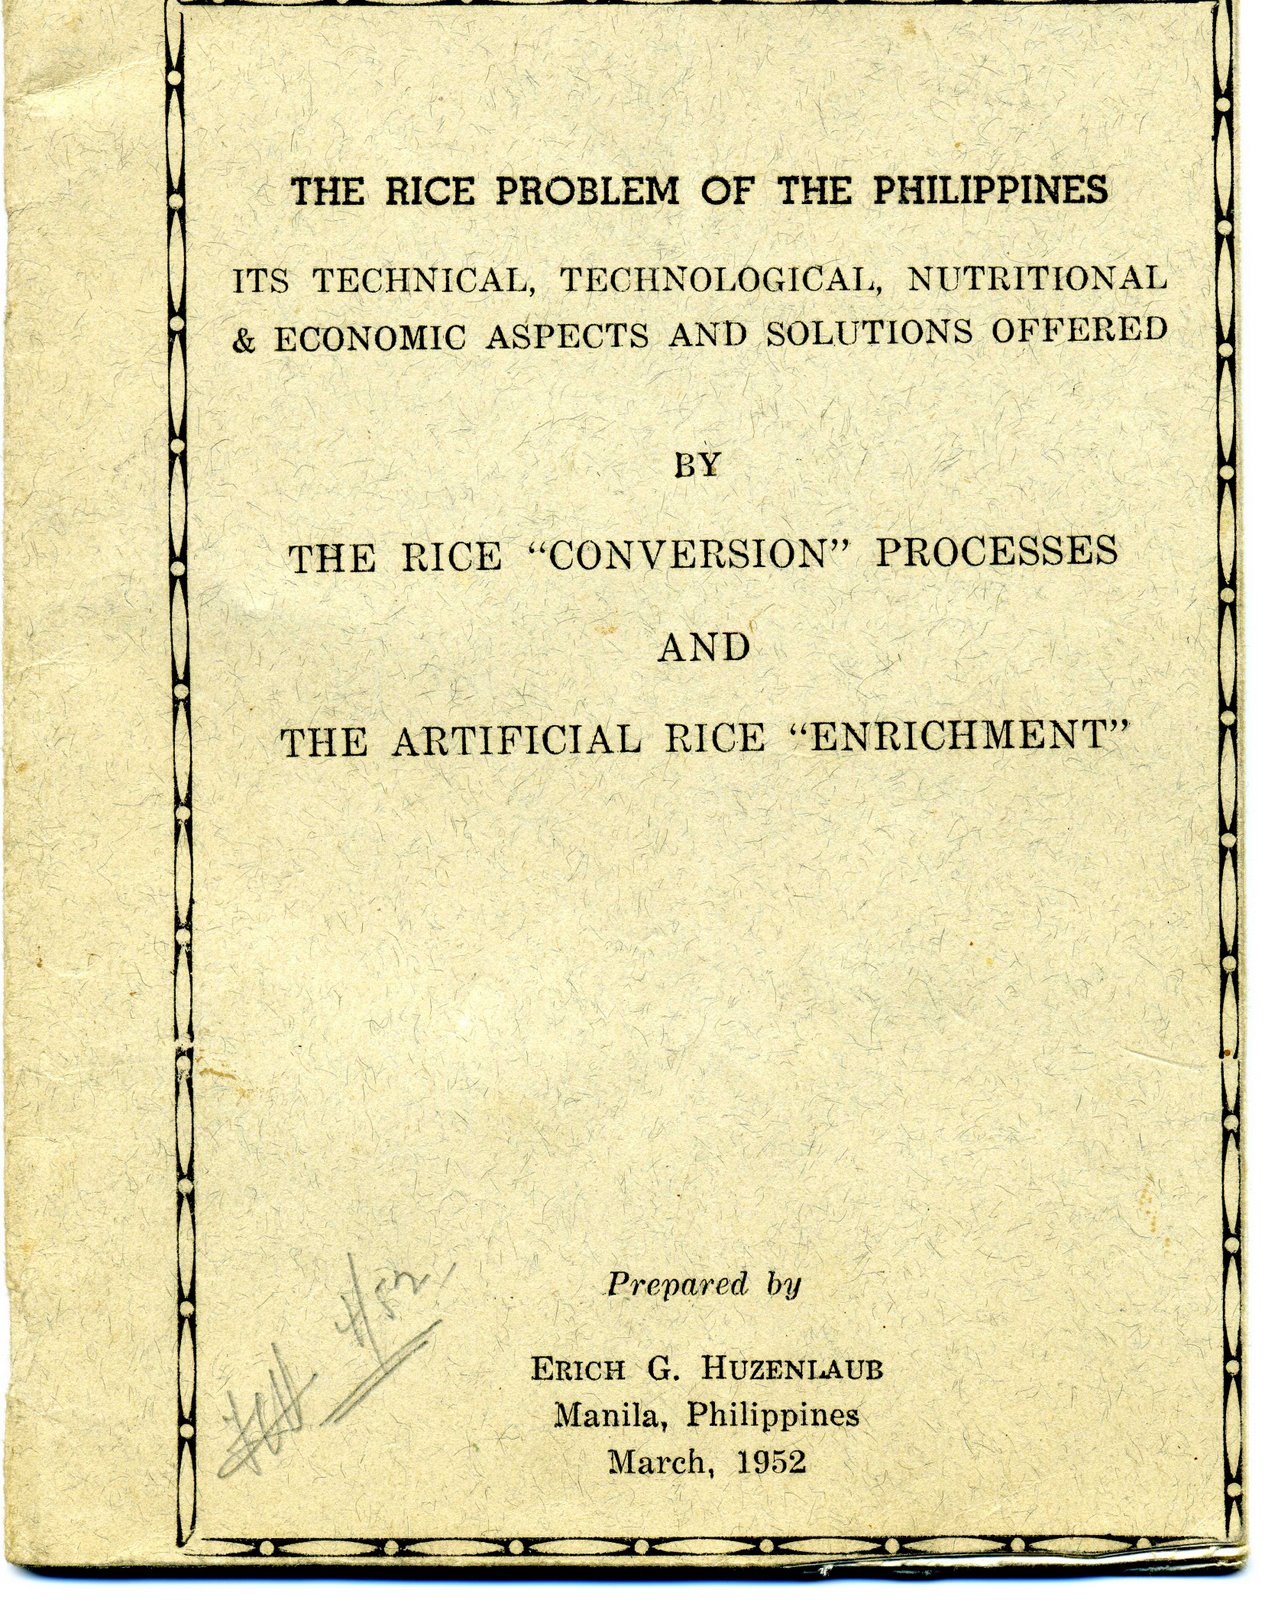 [The+Rice+Problem+of+the+Philippines+by+Erich+Huzenlaub+Cover.jpg]